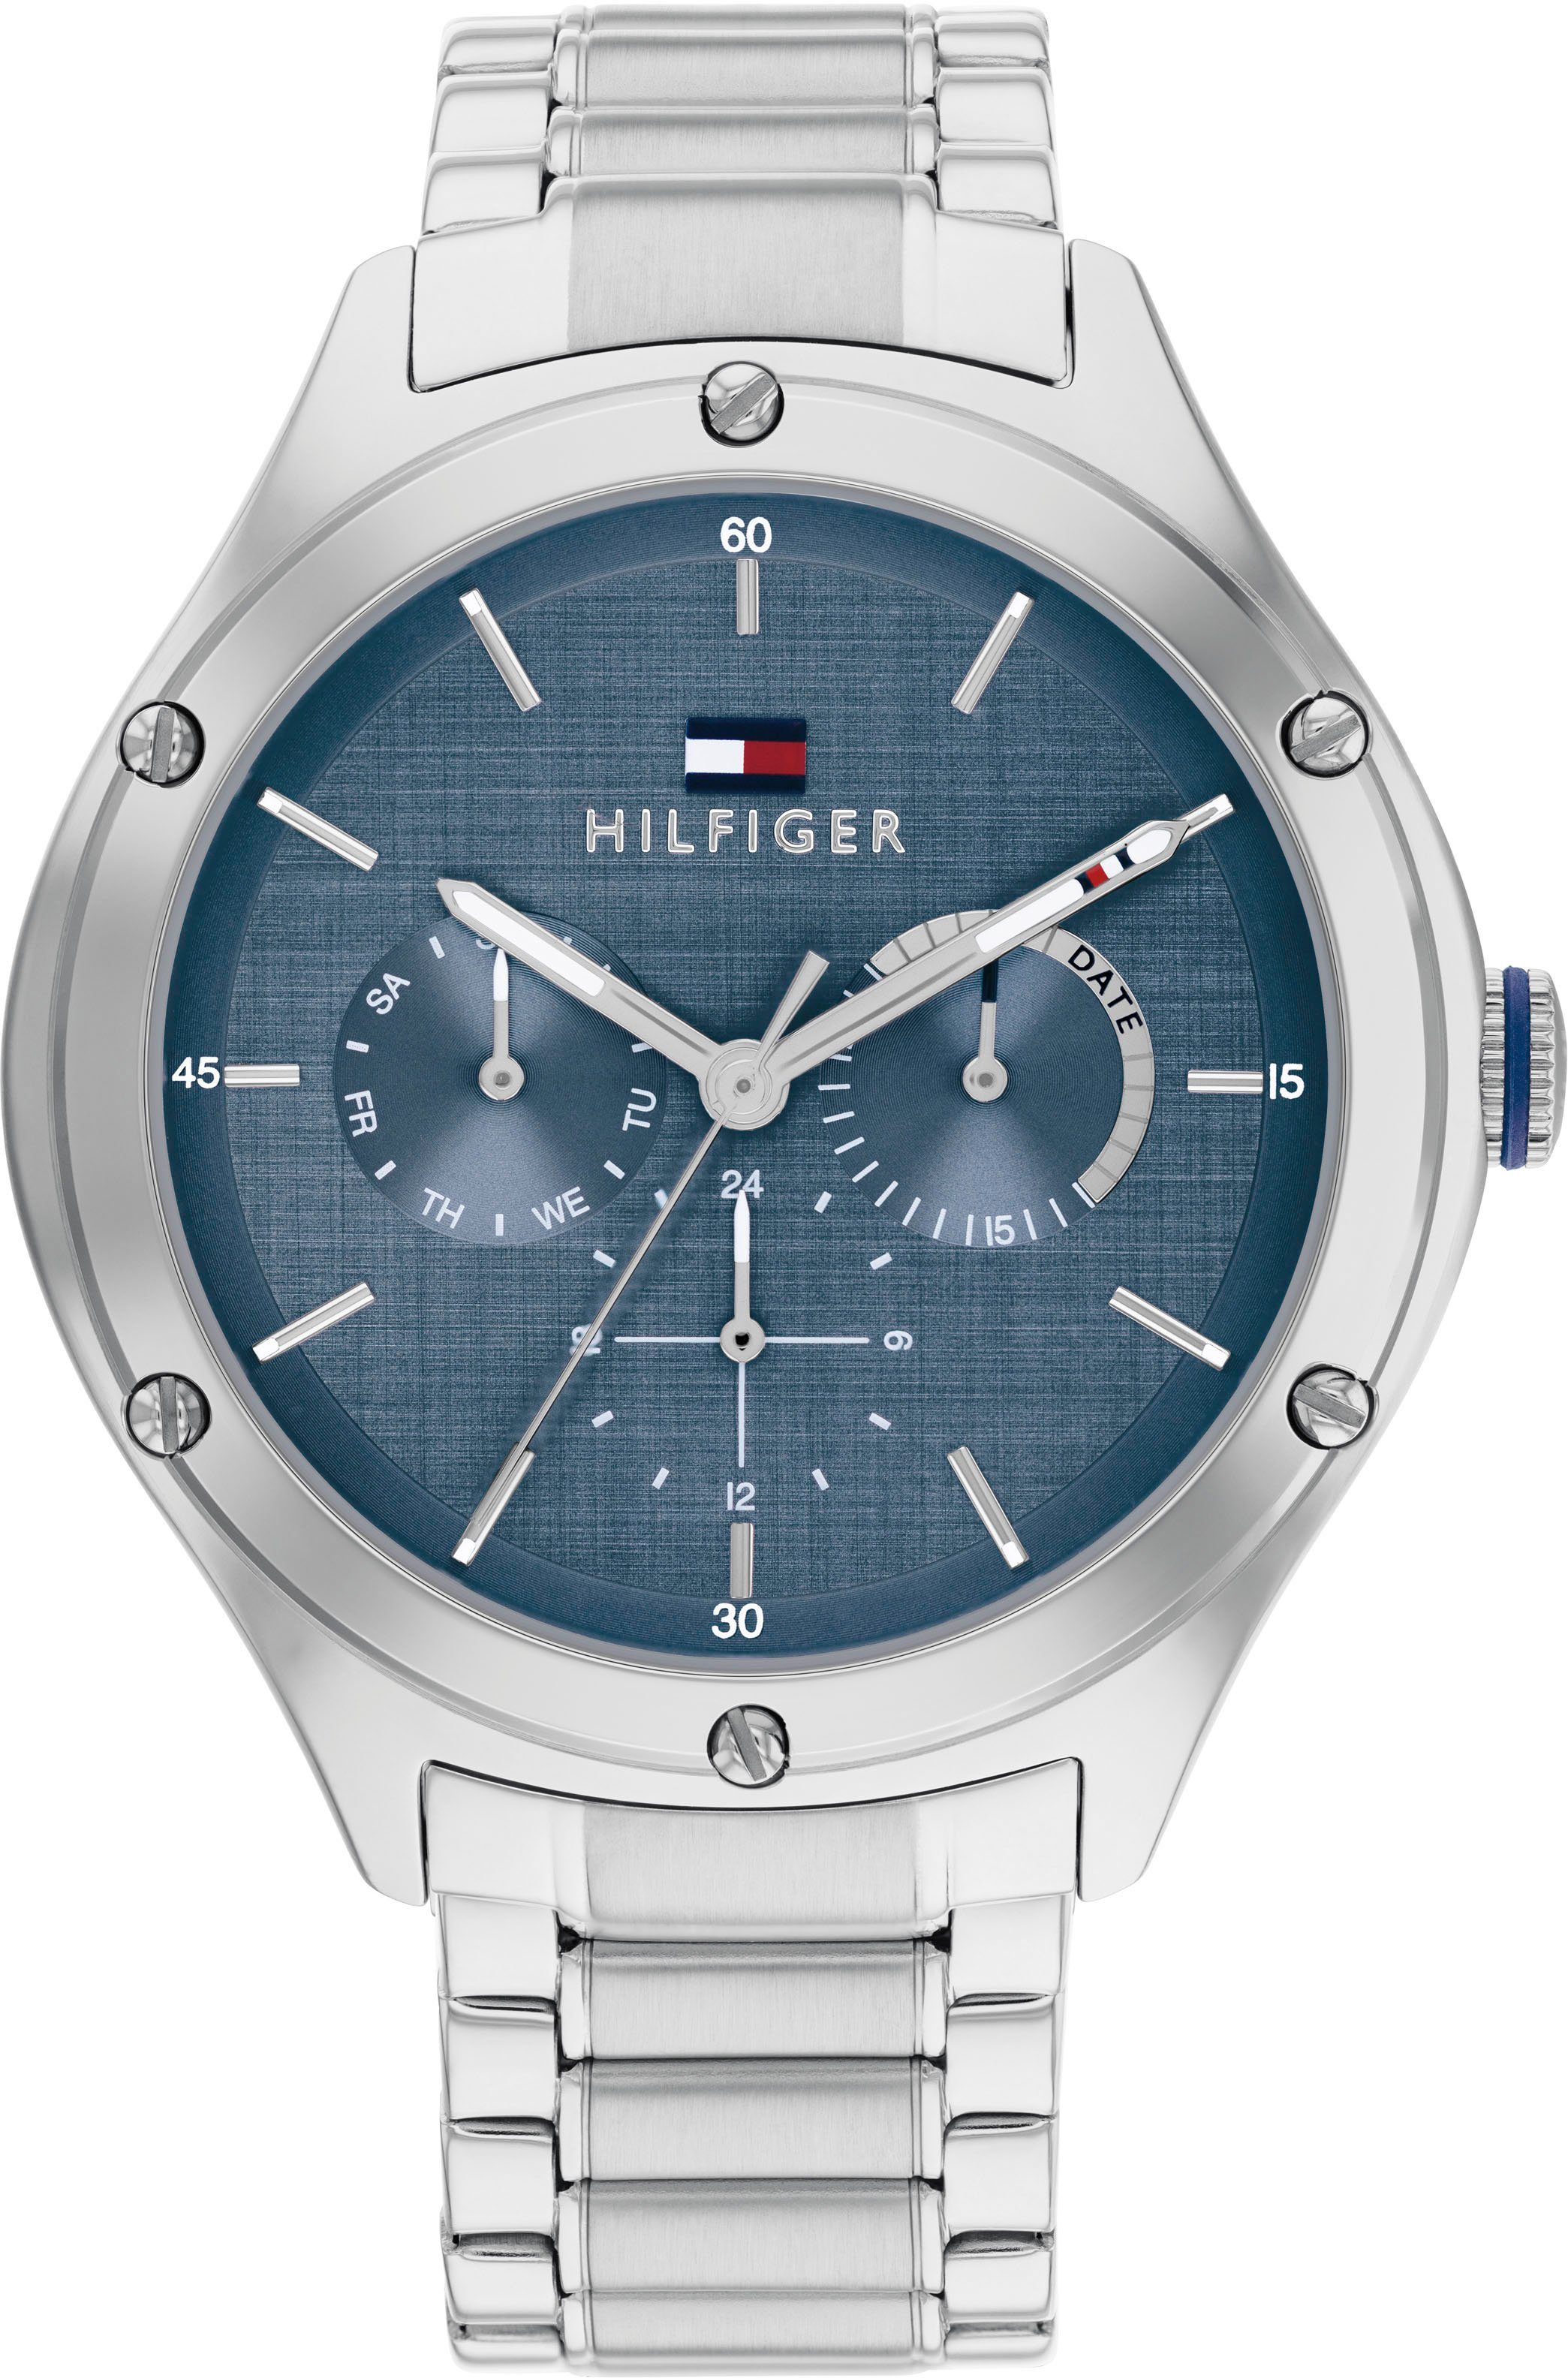 Tommy Hilfiger Multifunktionsuhr CLASSIC, 1782657